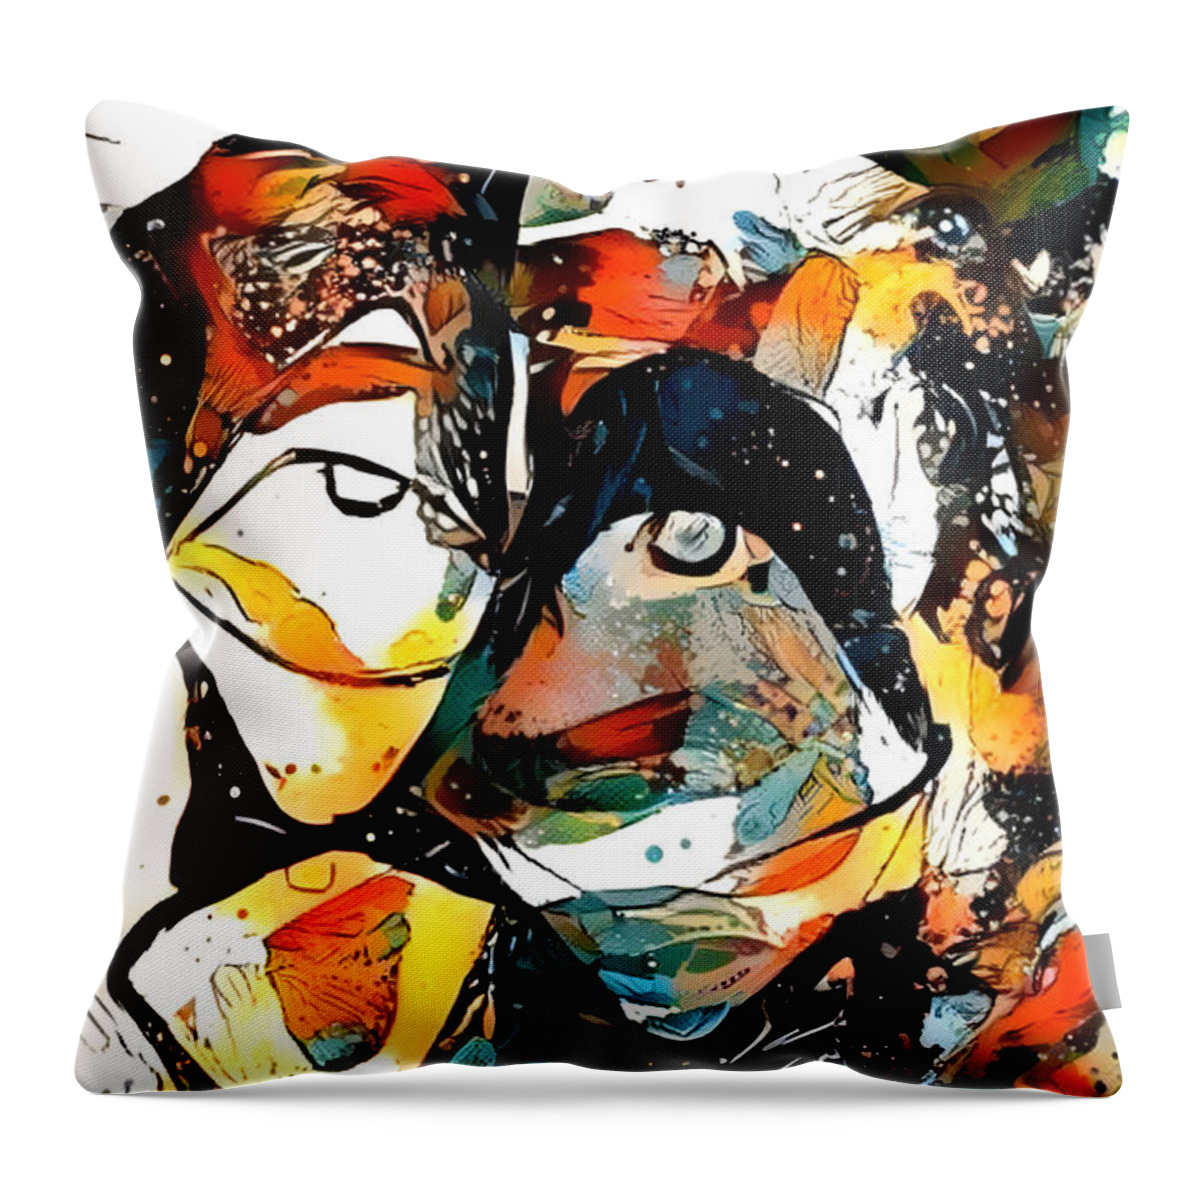 Contemporary Art Throw Pillow featuring the digital art 44 by Jeremiah Ray